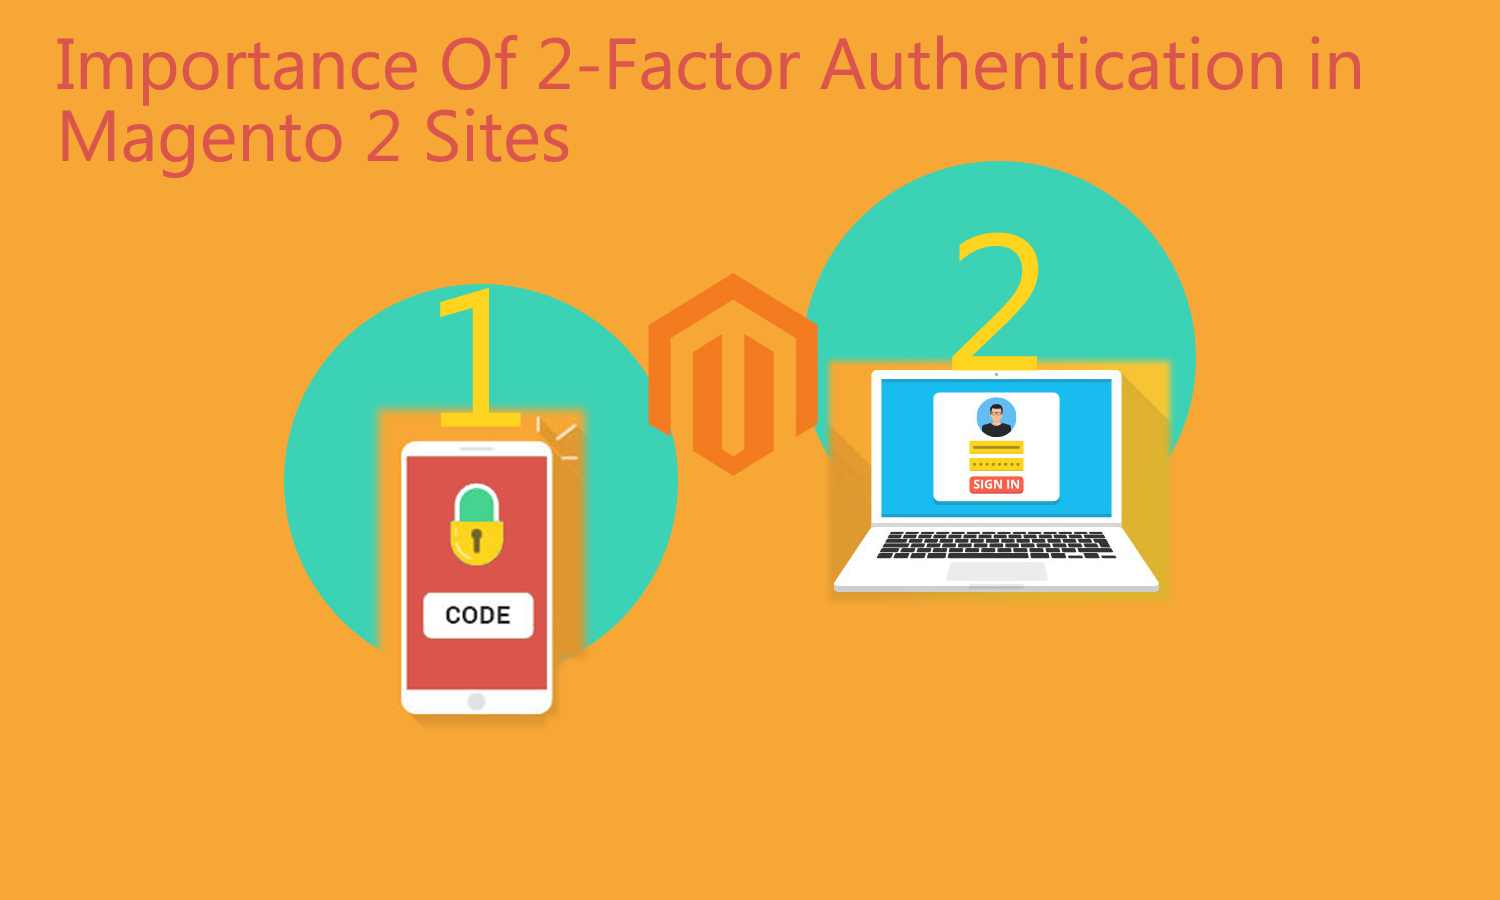 What Is The Importance Of 2-Factor Authentication For Magento 2 Sites?